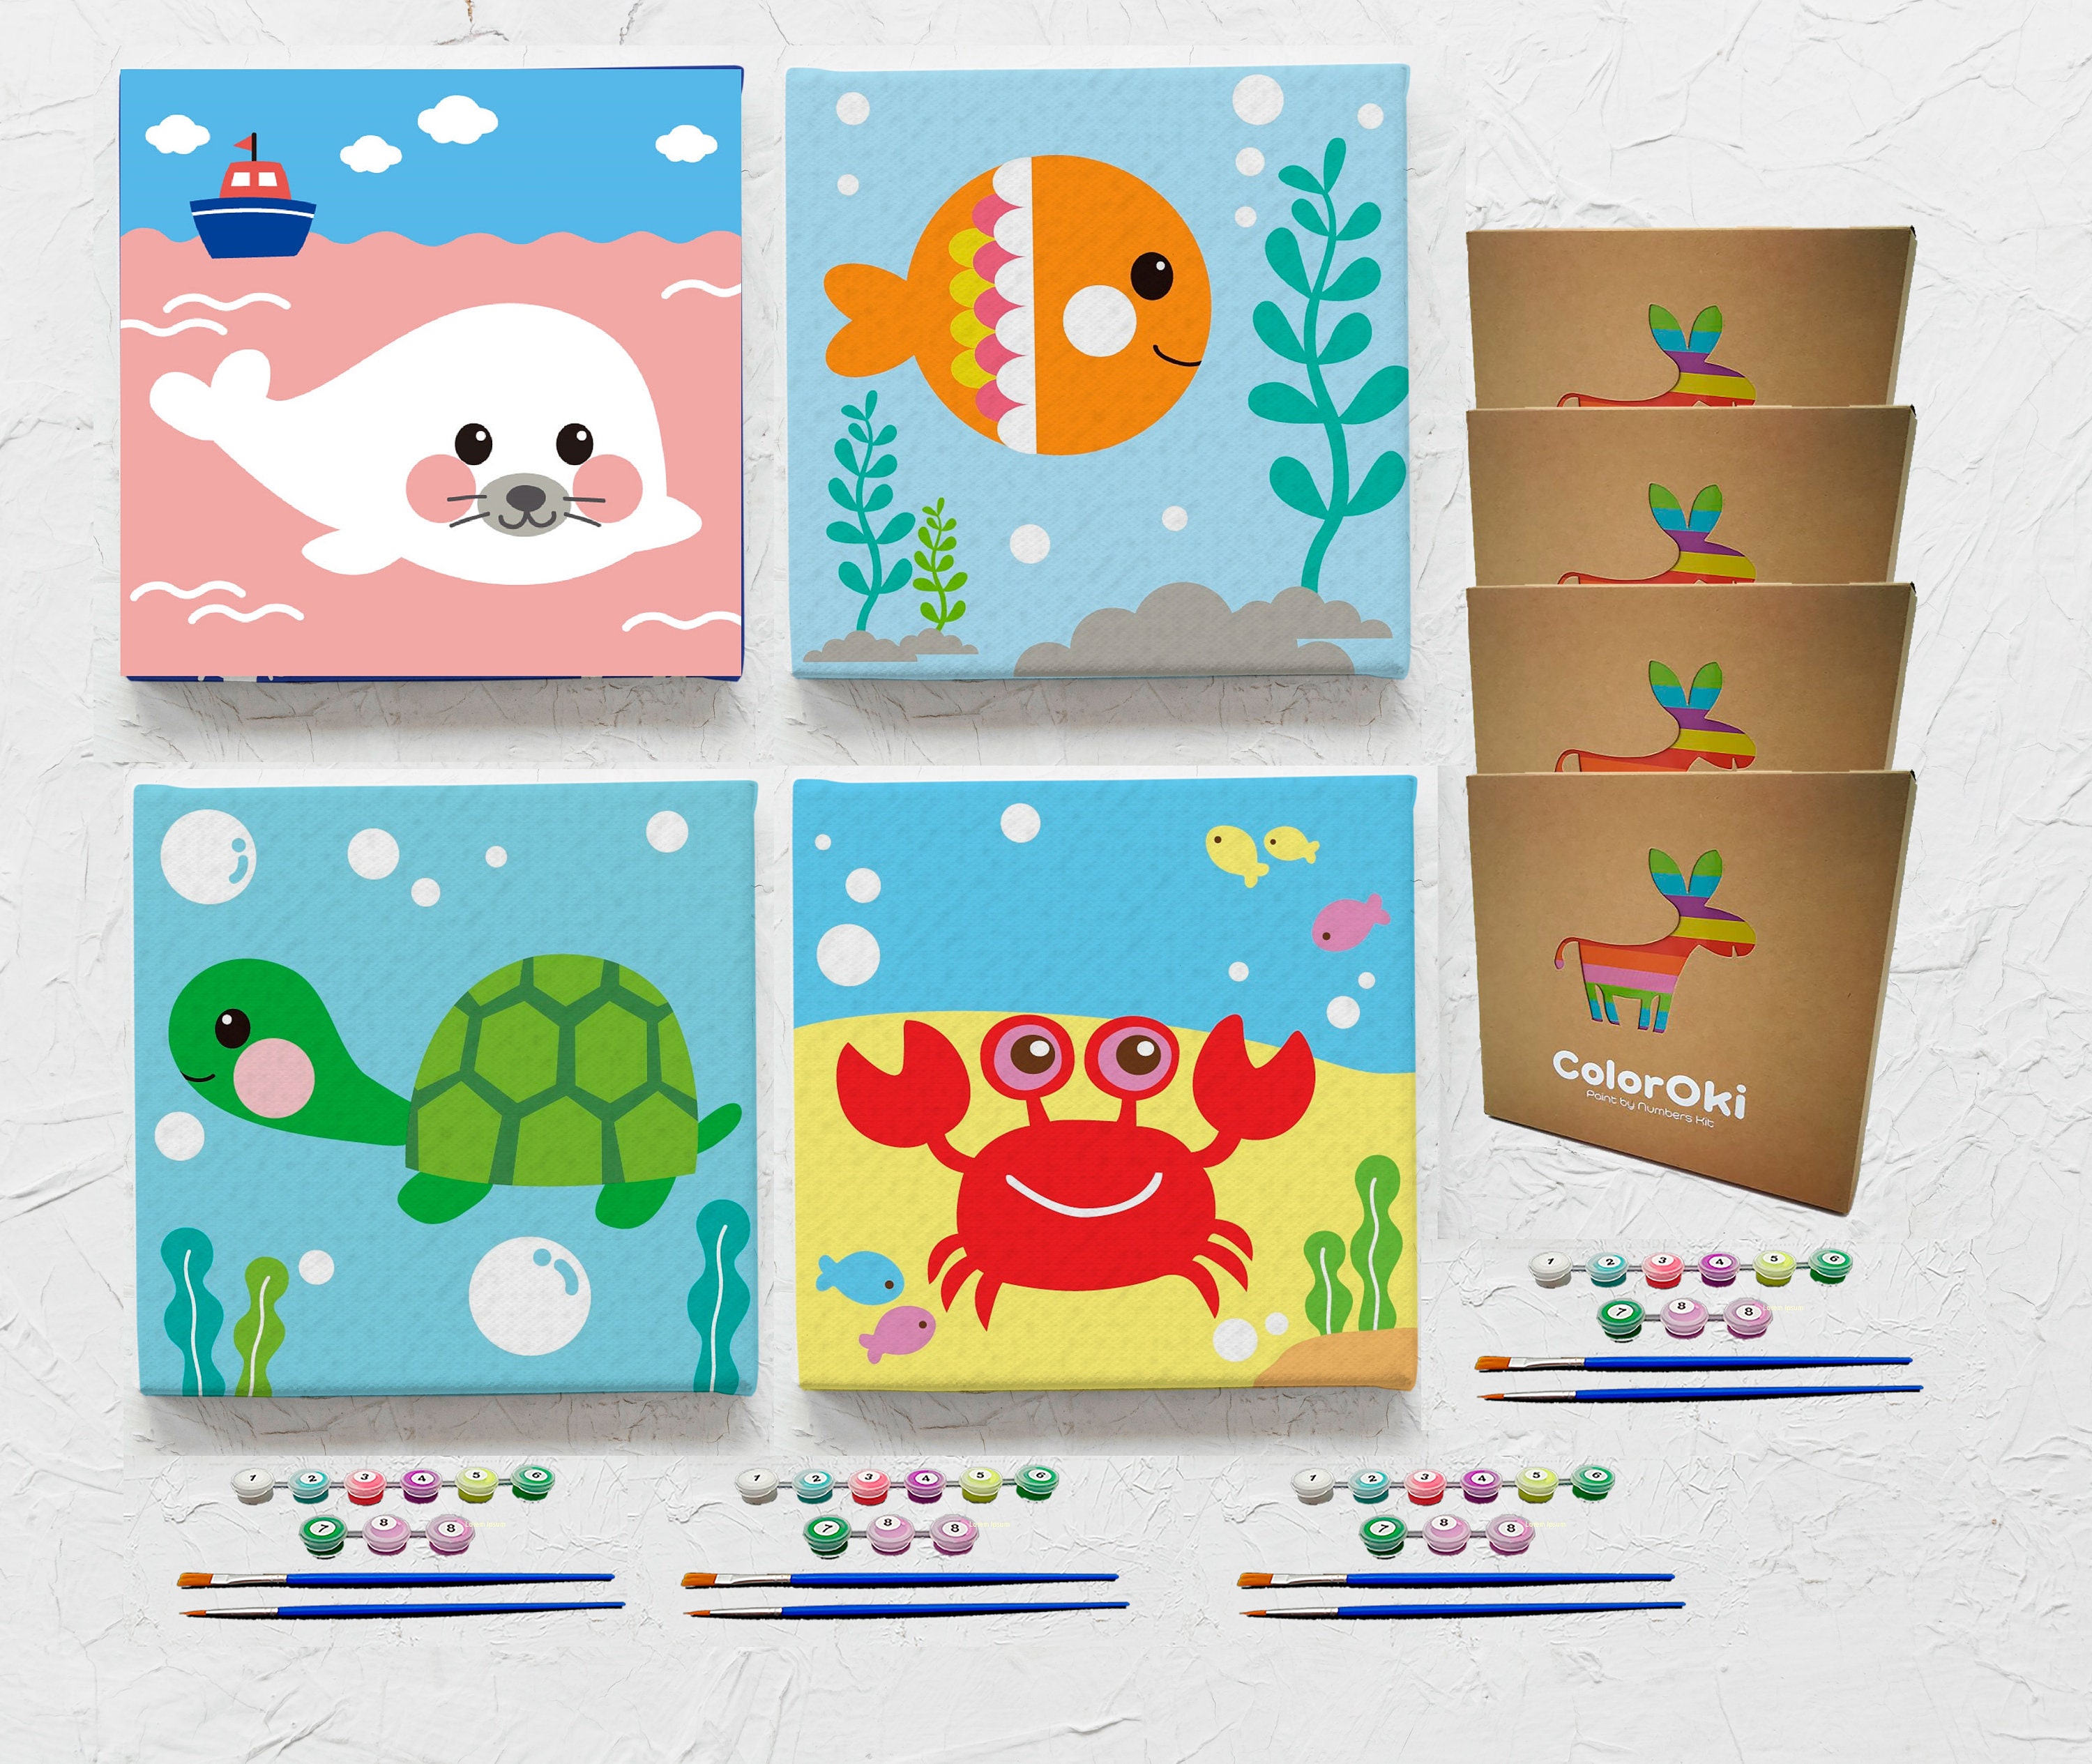 Snowman and Teddybear Winter Theme Canvas Painting Kit for Kids. Paint Your  Own, Easy Art Activity Kit. Christmas Holiday Theme Crafts 